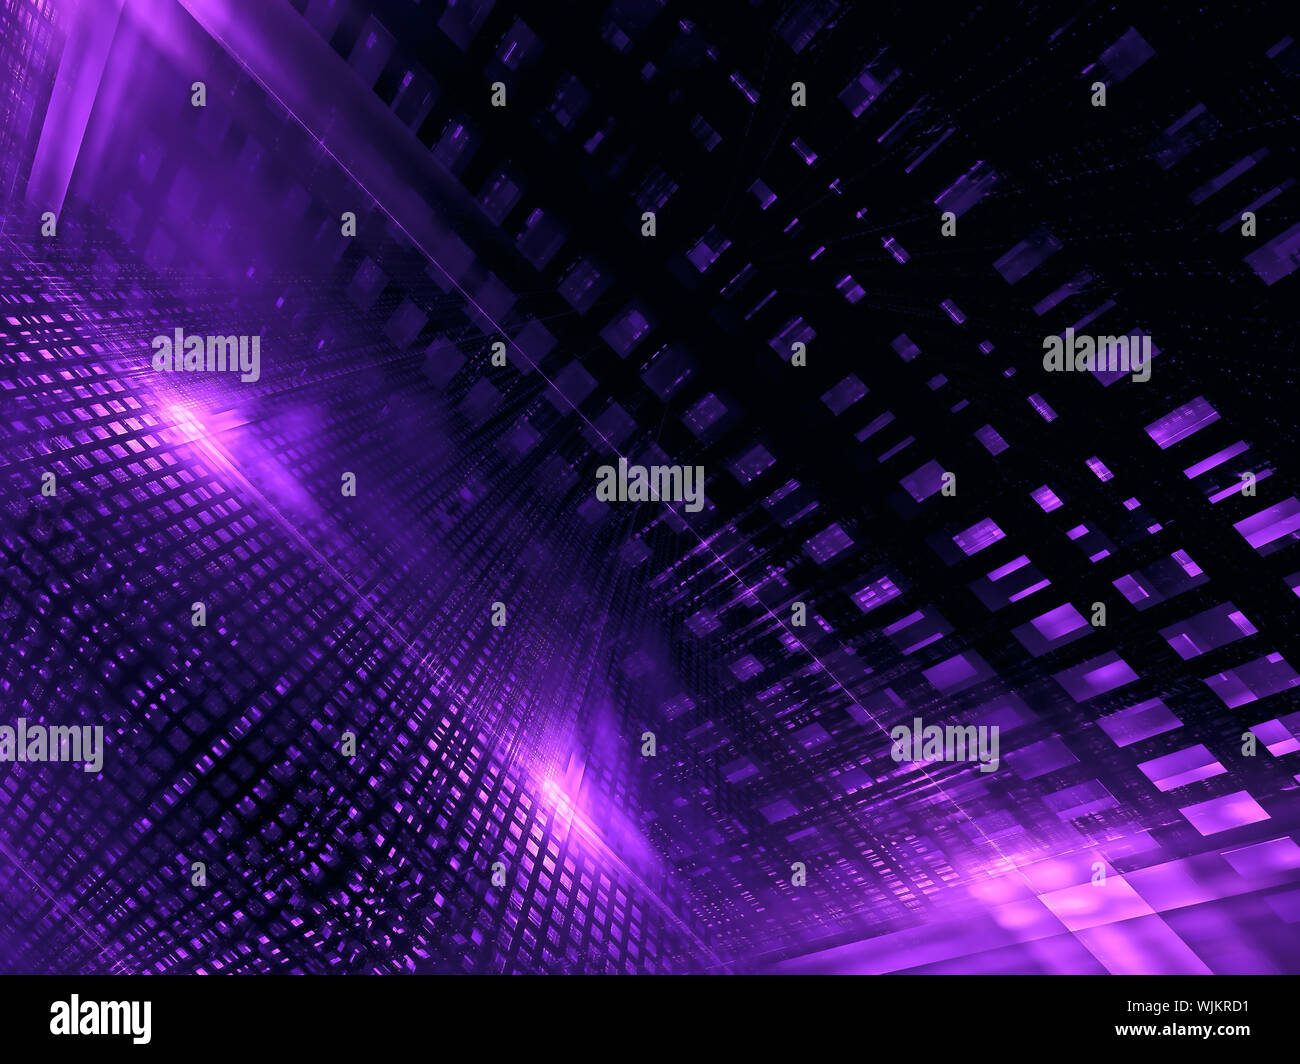 Abstract neon glowing grid - digitally generated image Stock Photo